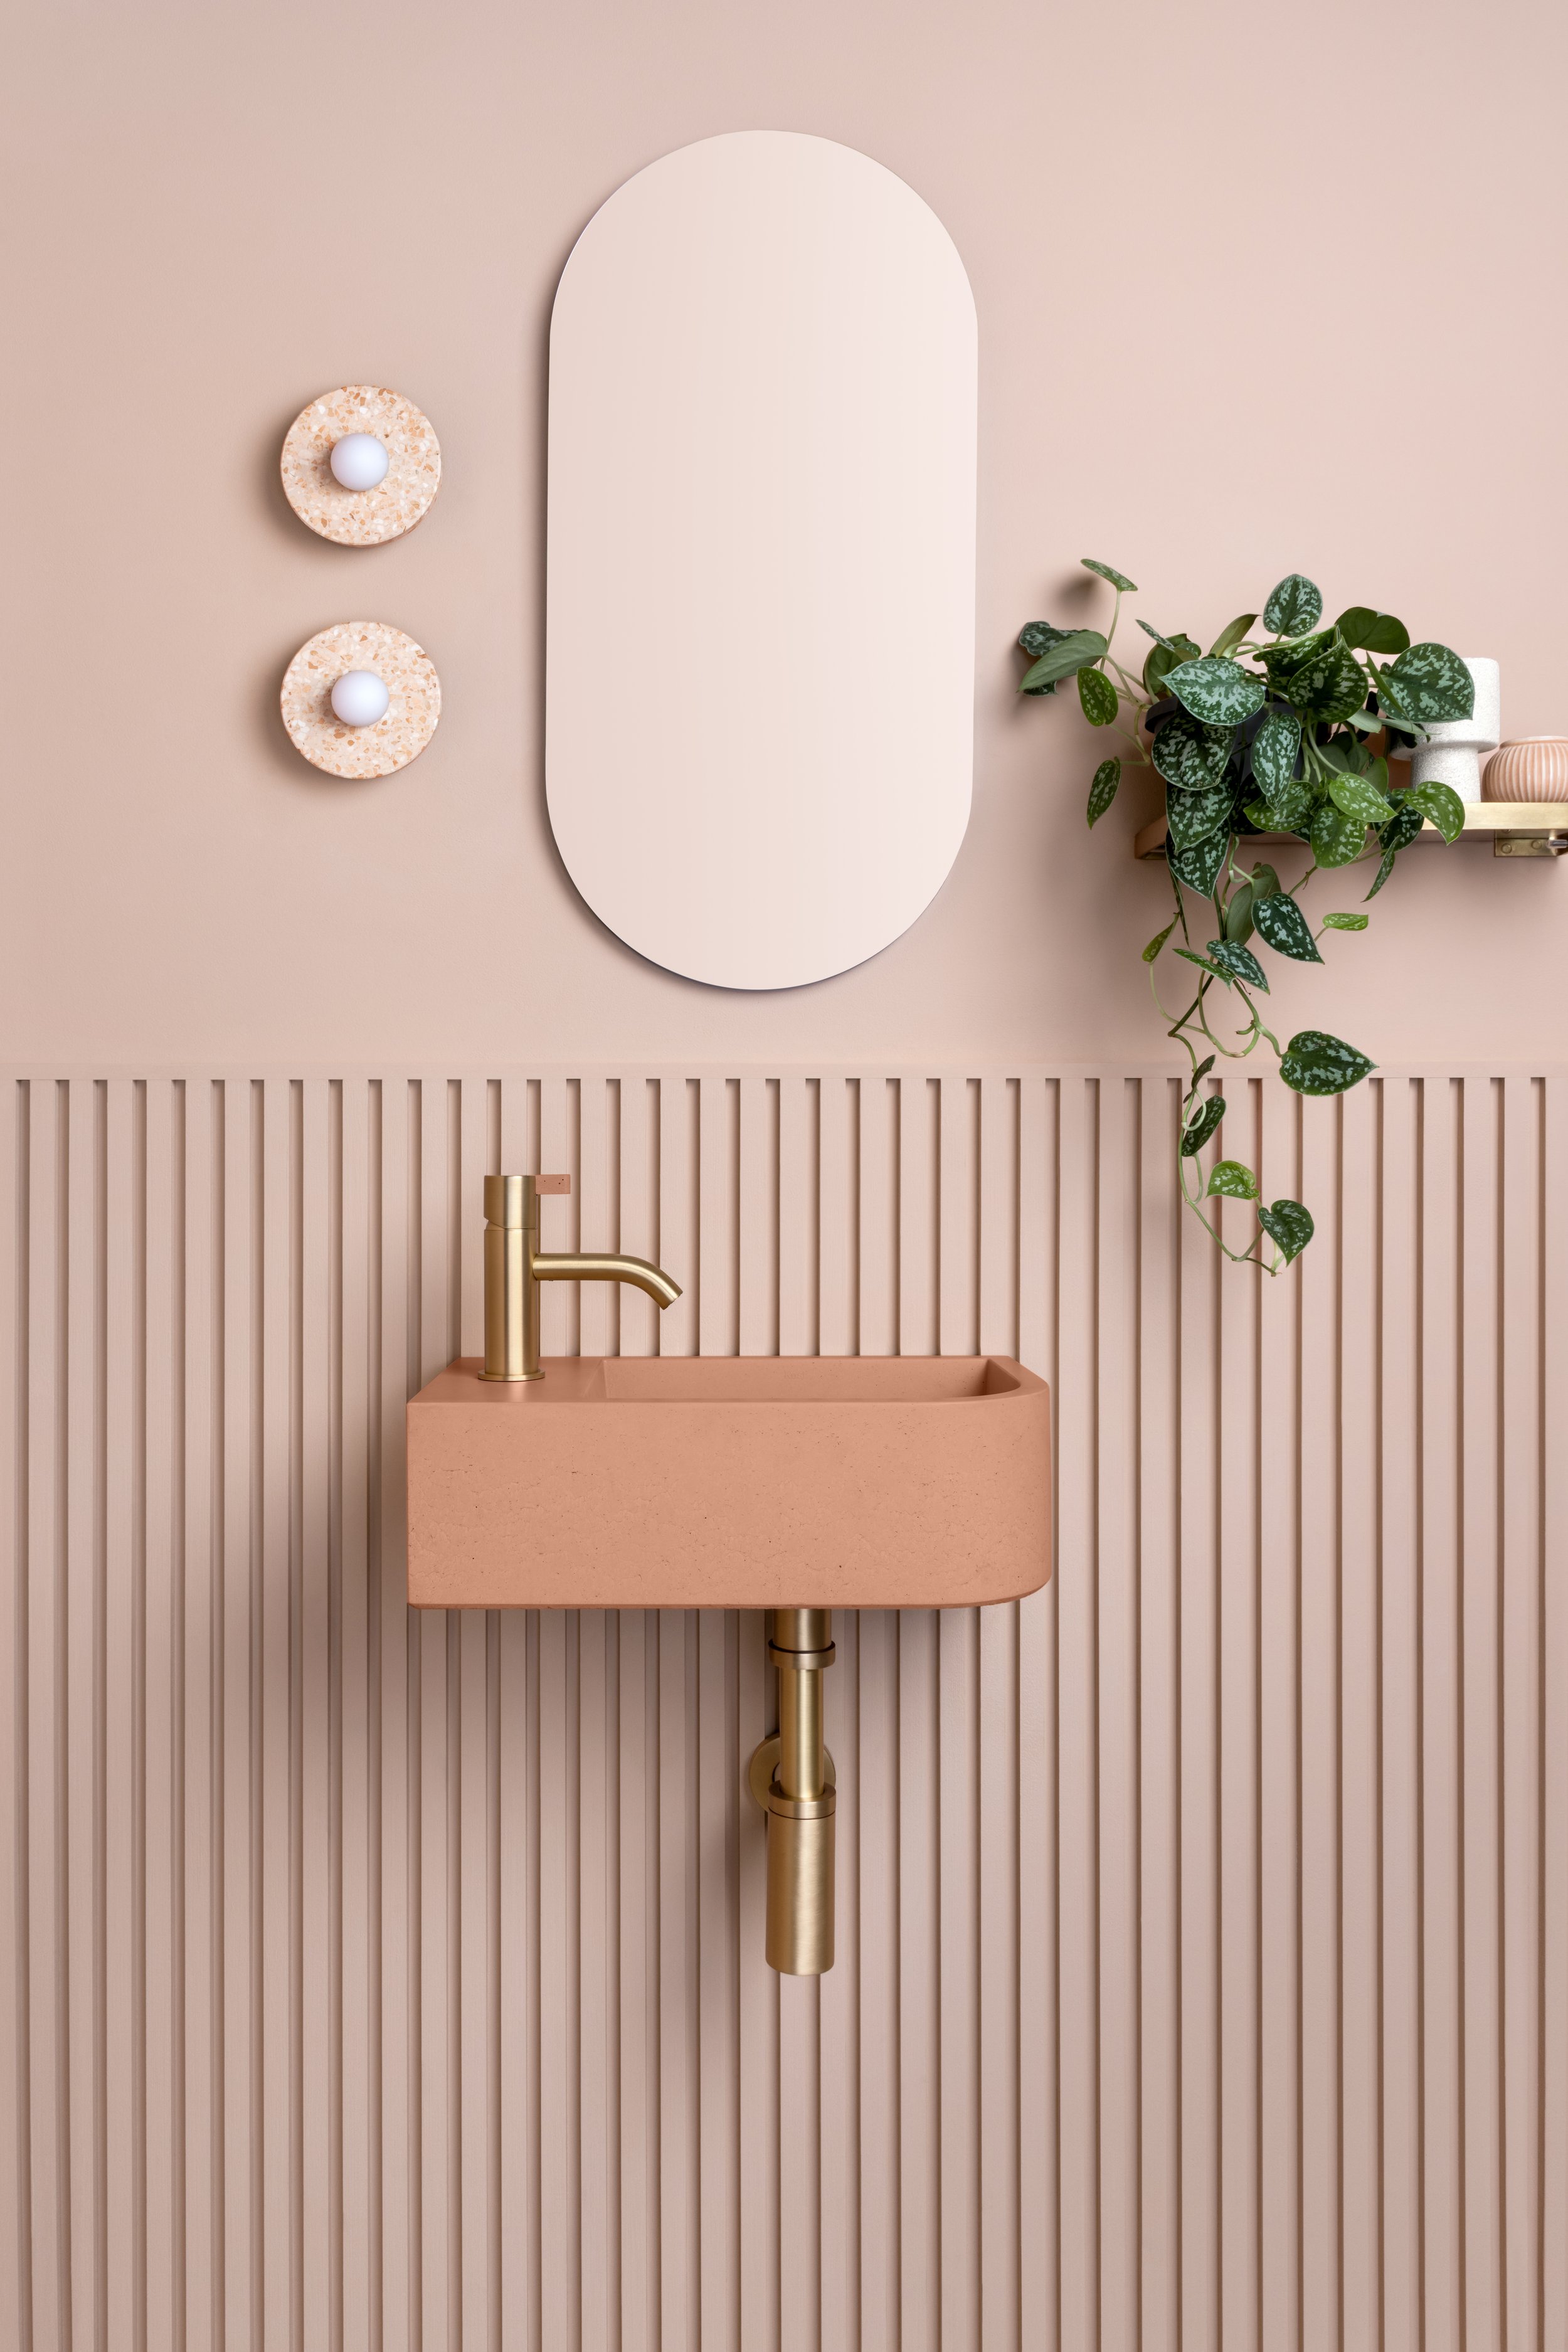 Juno A1 - Clay with Alto Monobloc tap in Brushed Brass and Clay 2x3.jpg